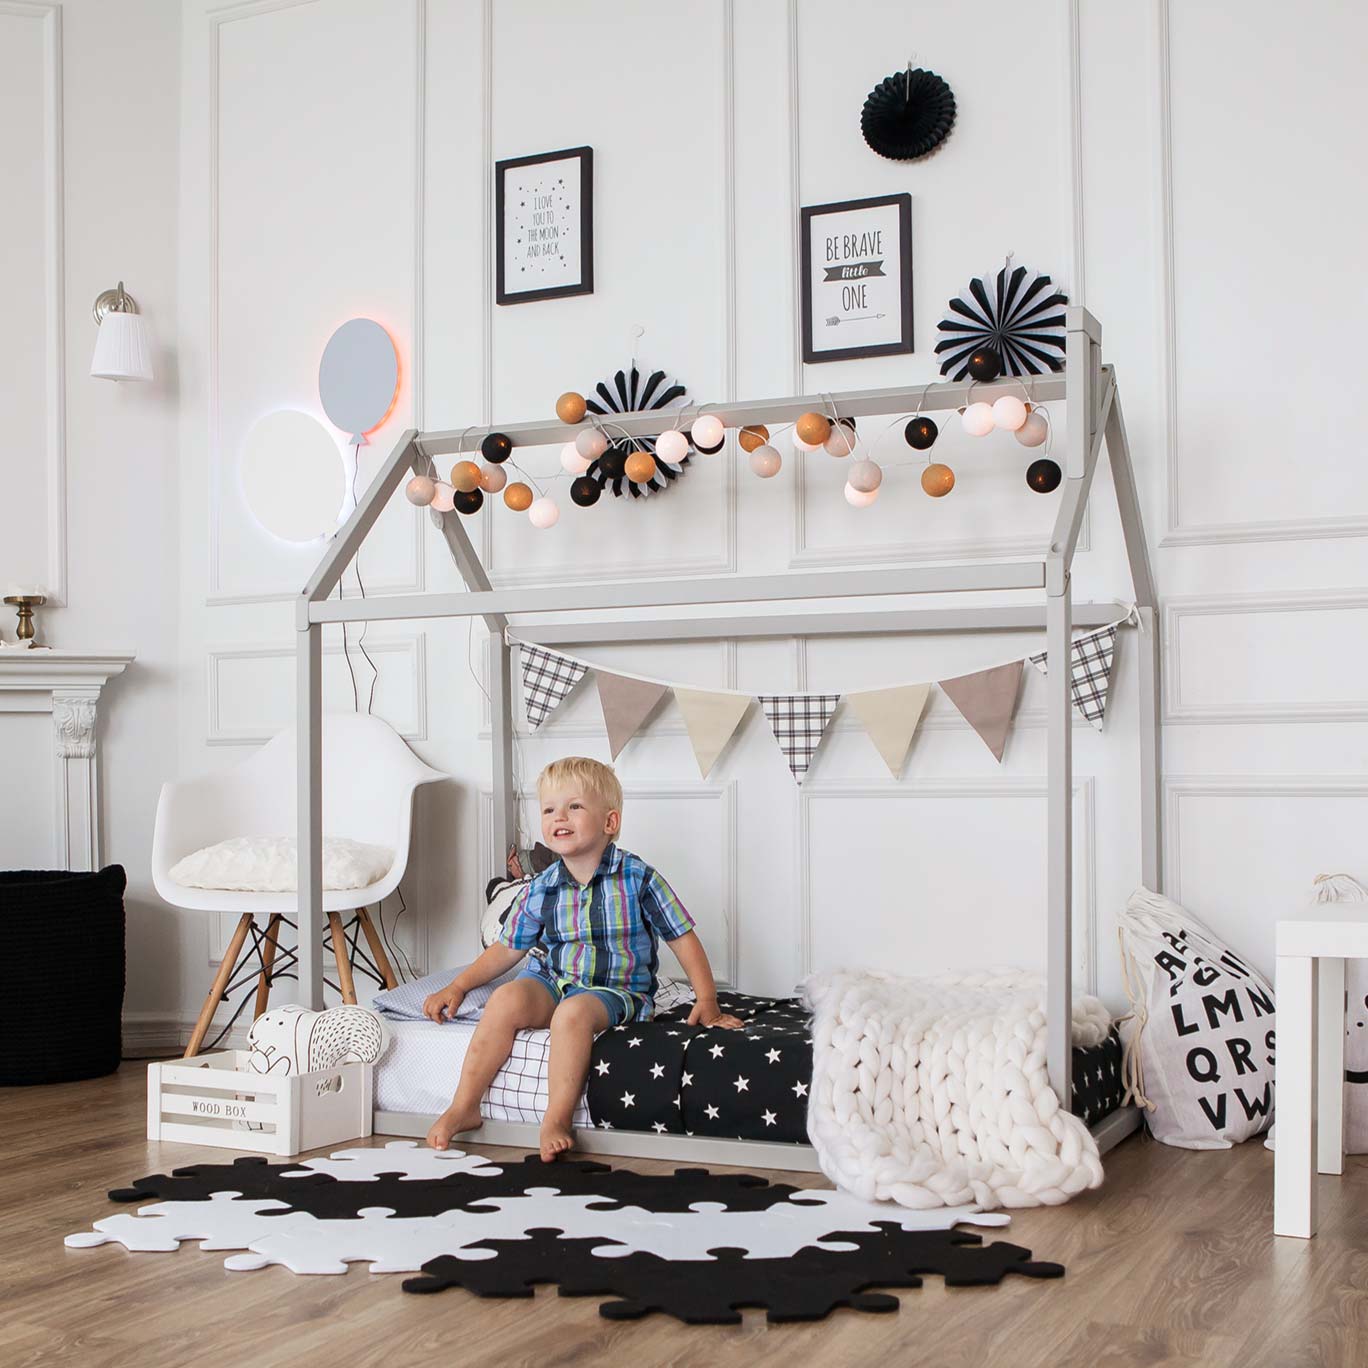 A child is sitting on a bed in a room with black and white decorations.